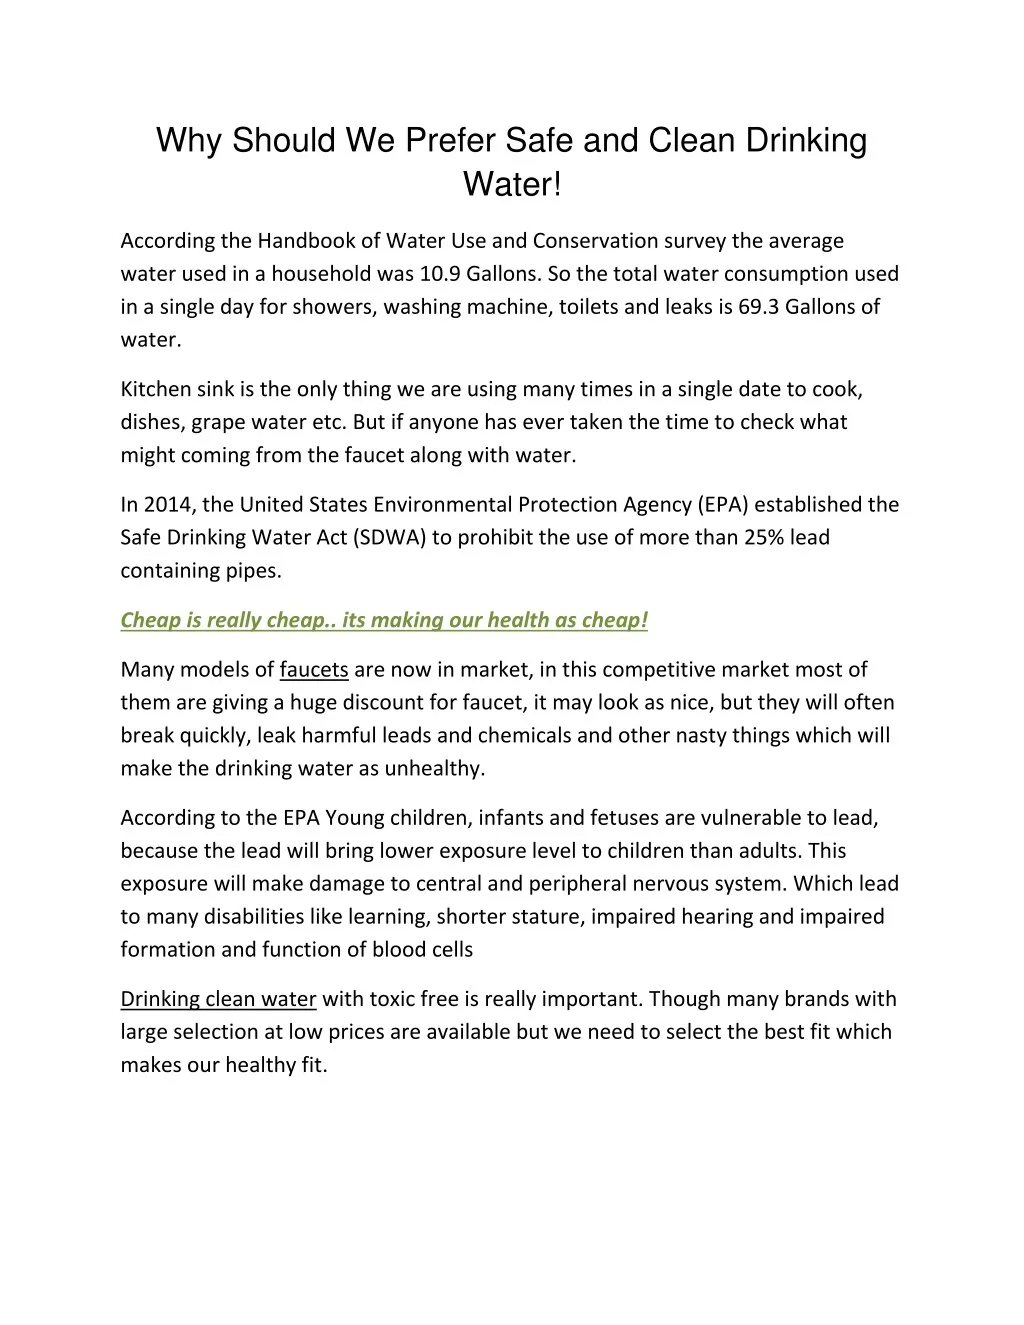 why should we prefer safe and clean drinking water